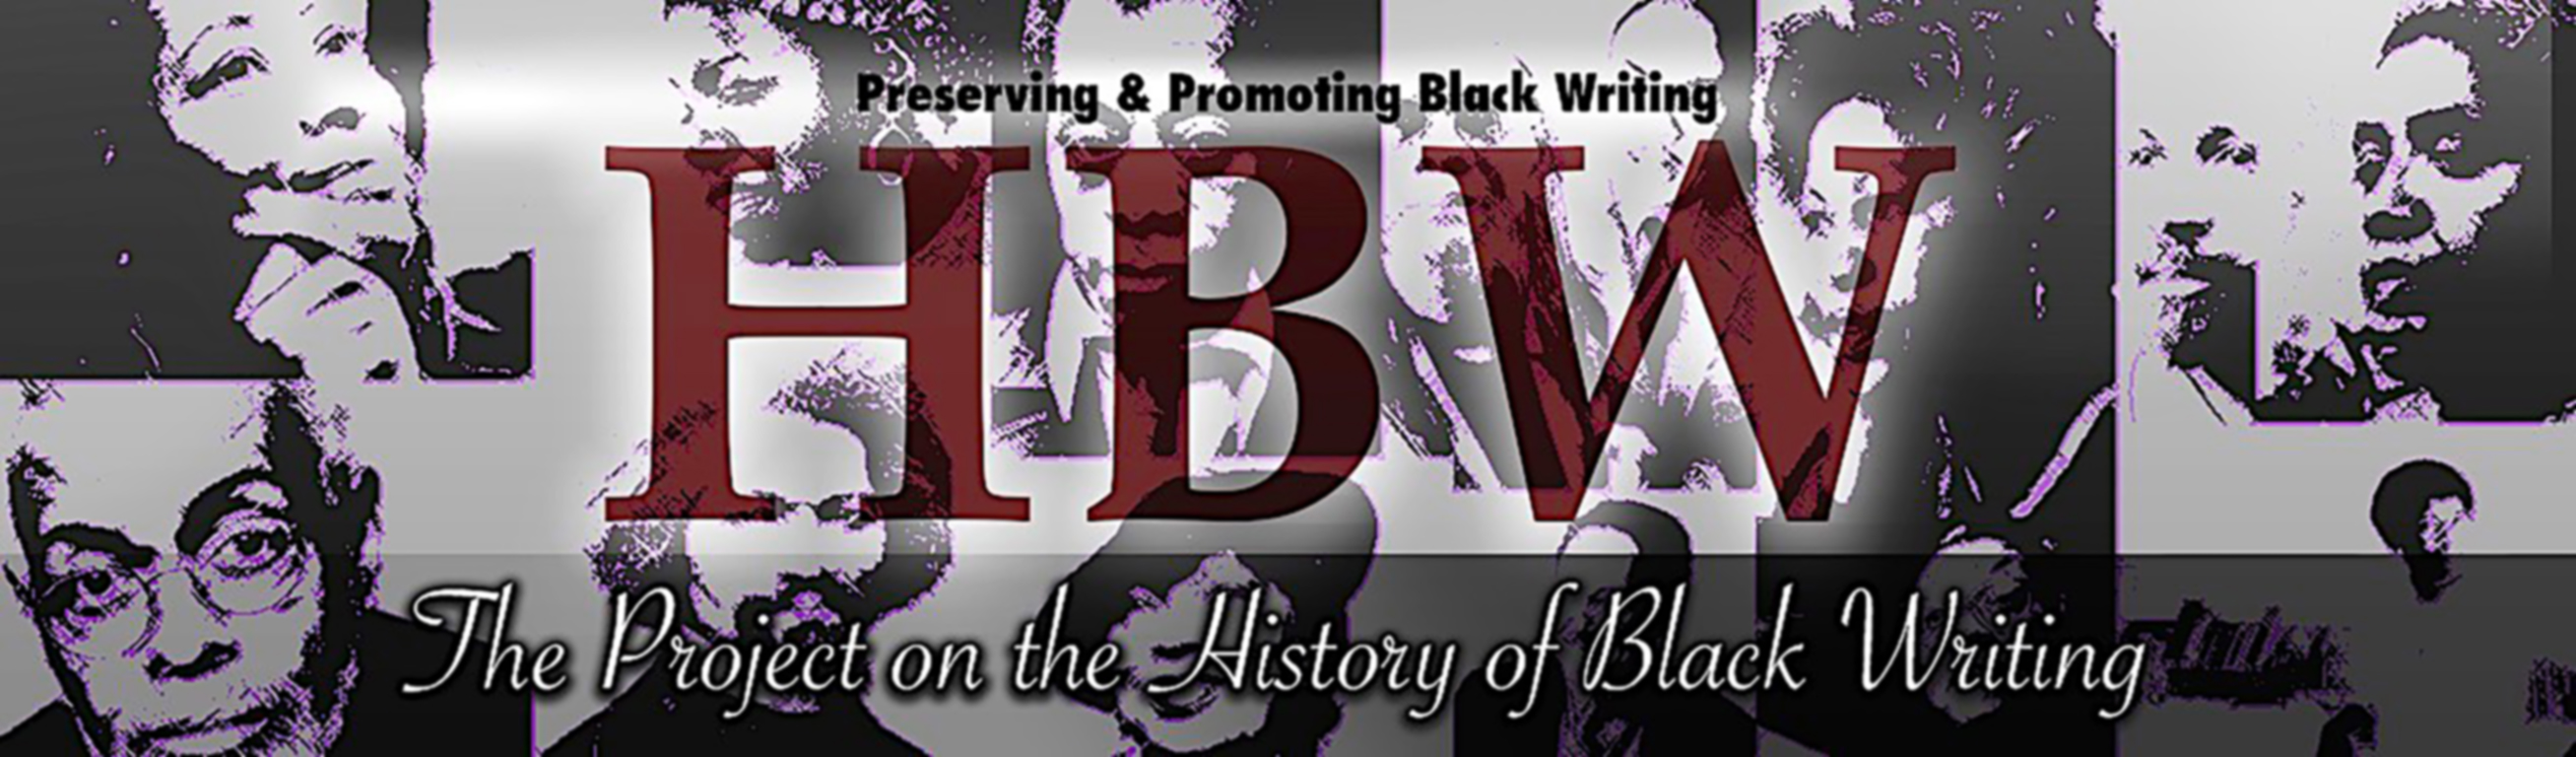 The Banner image for the HBW Blog, which was published from 2011-2021.